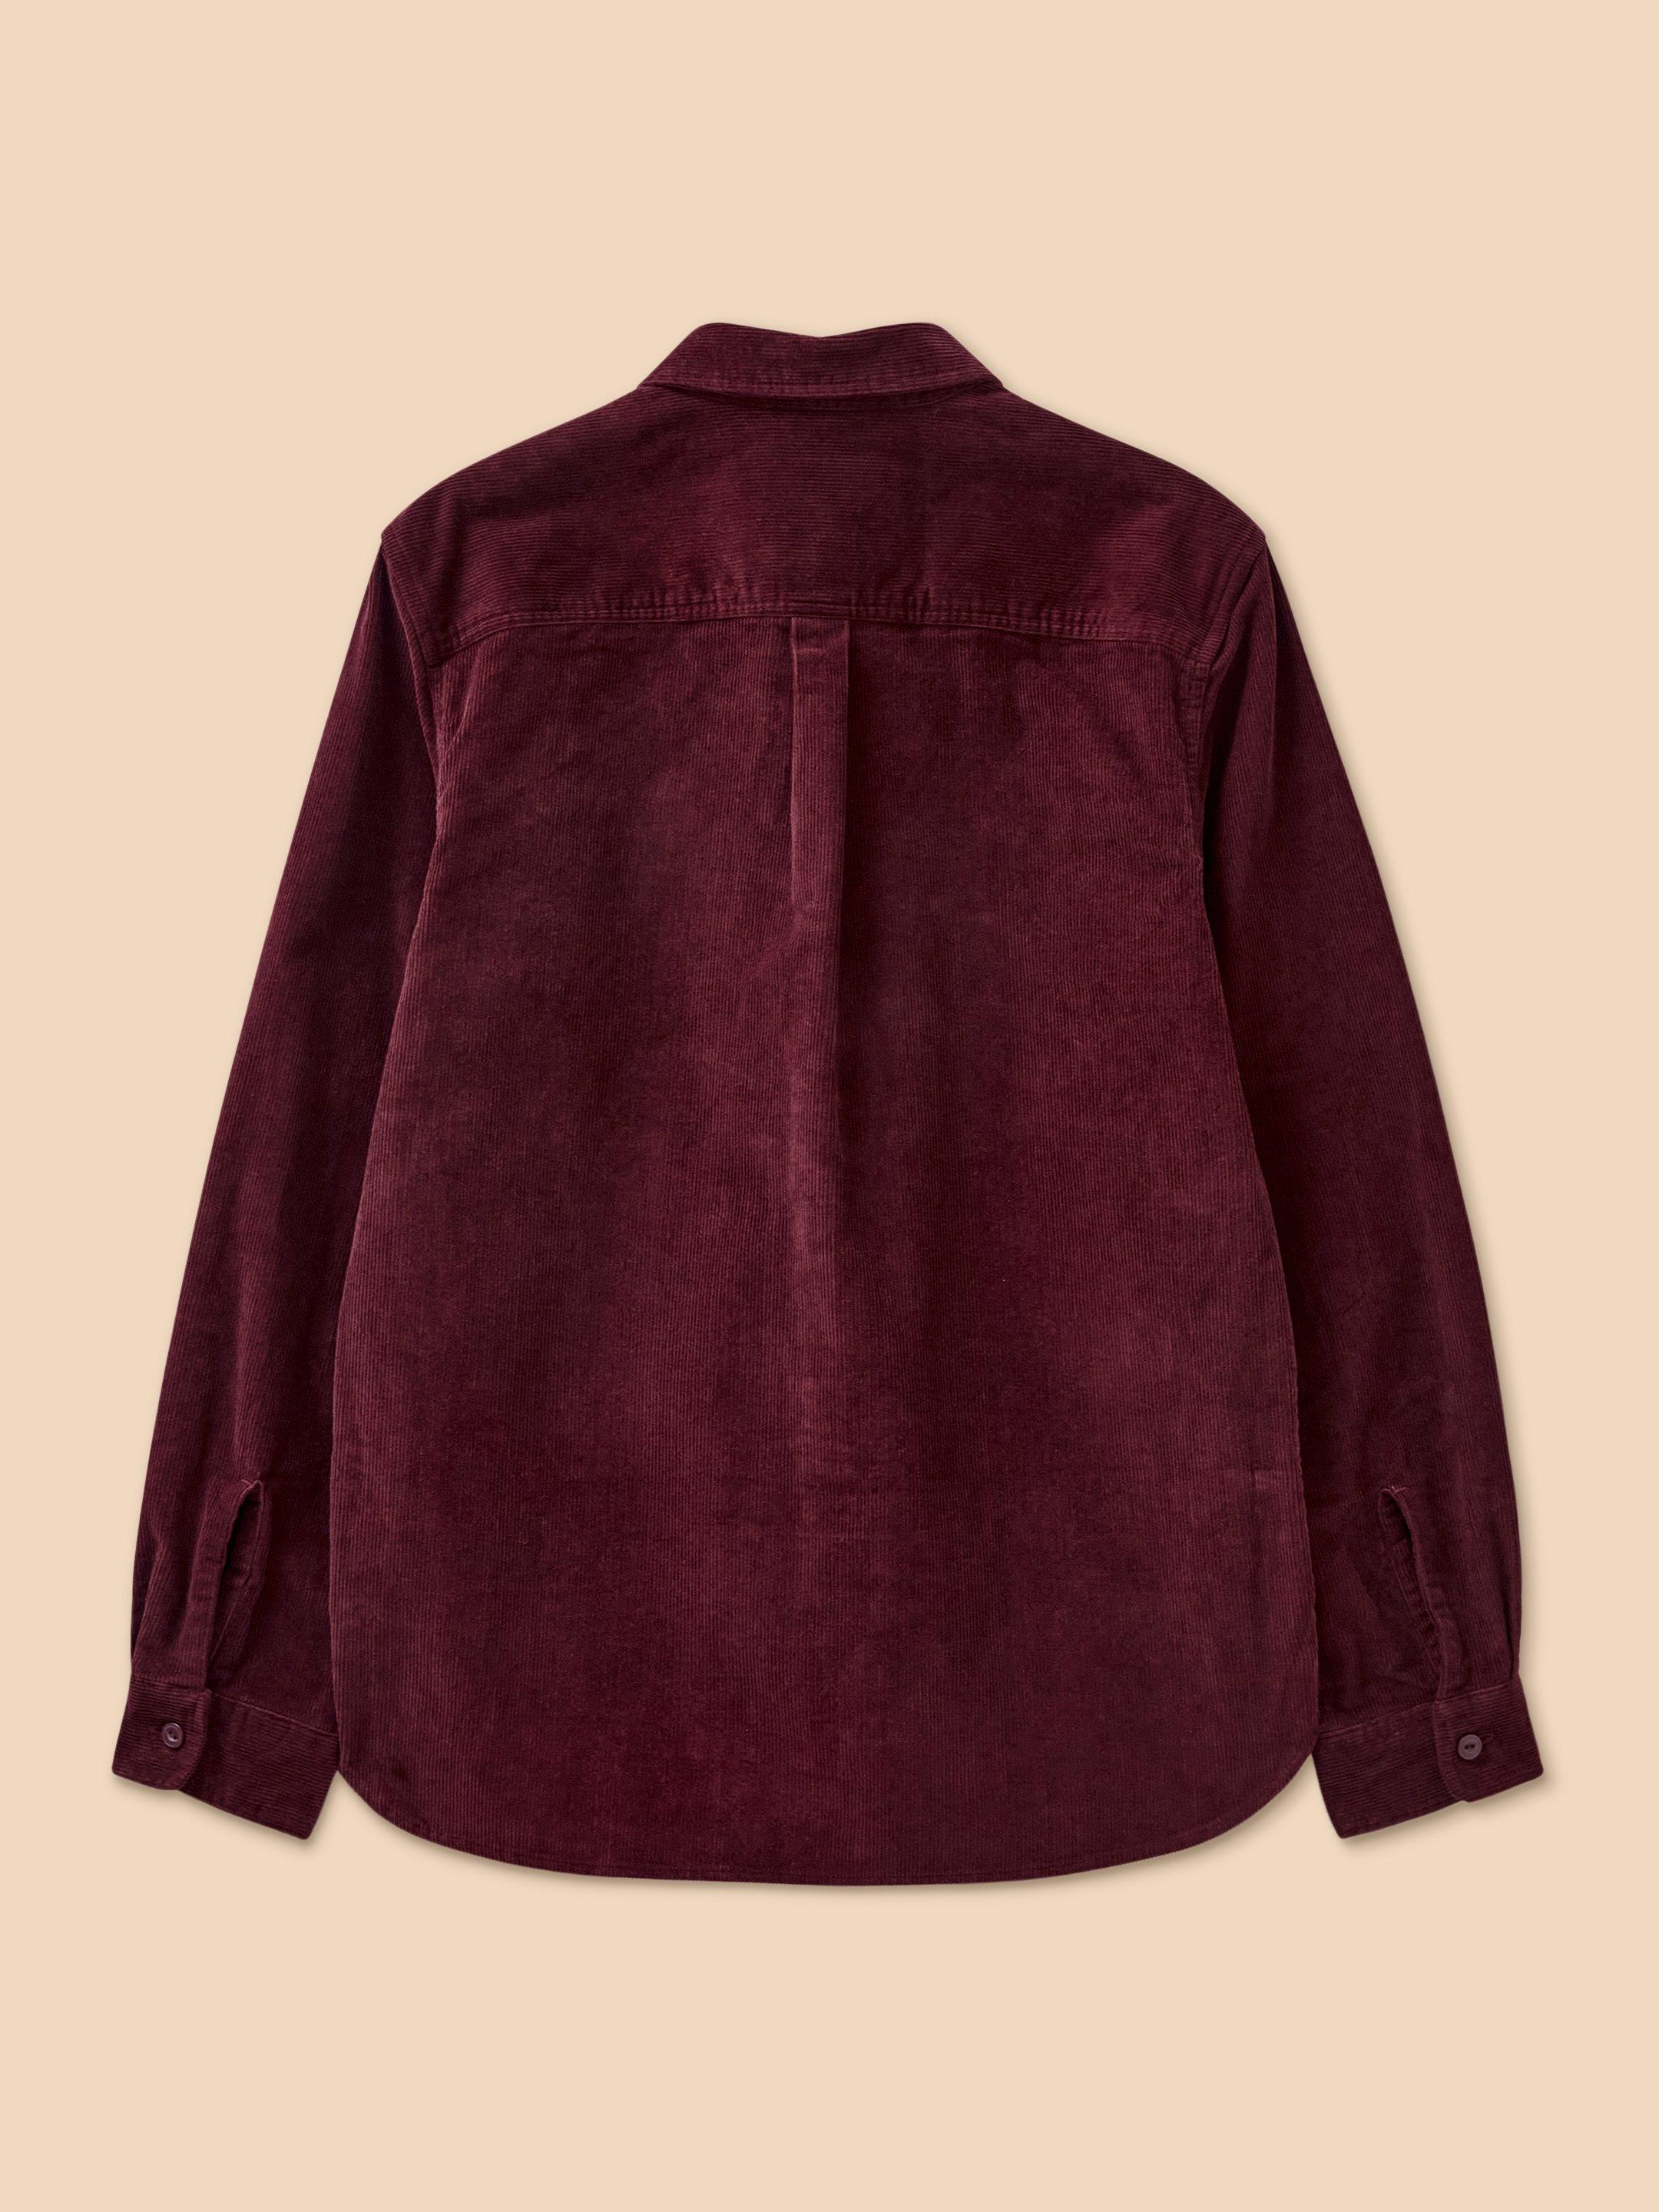 Whitwick Cord Shirt in DK RED - FLAT BACK